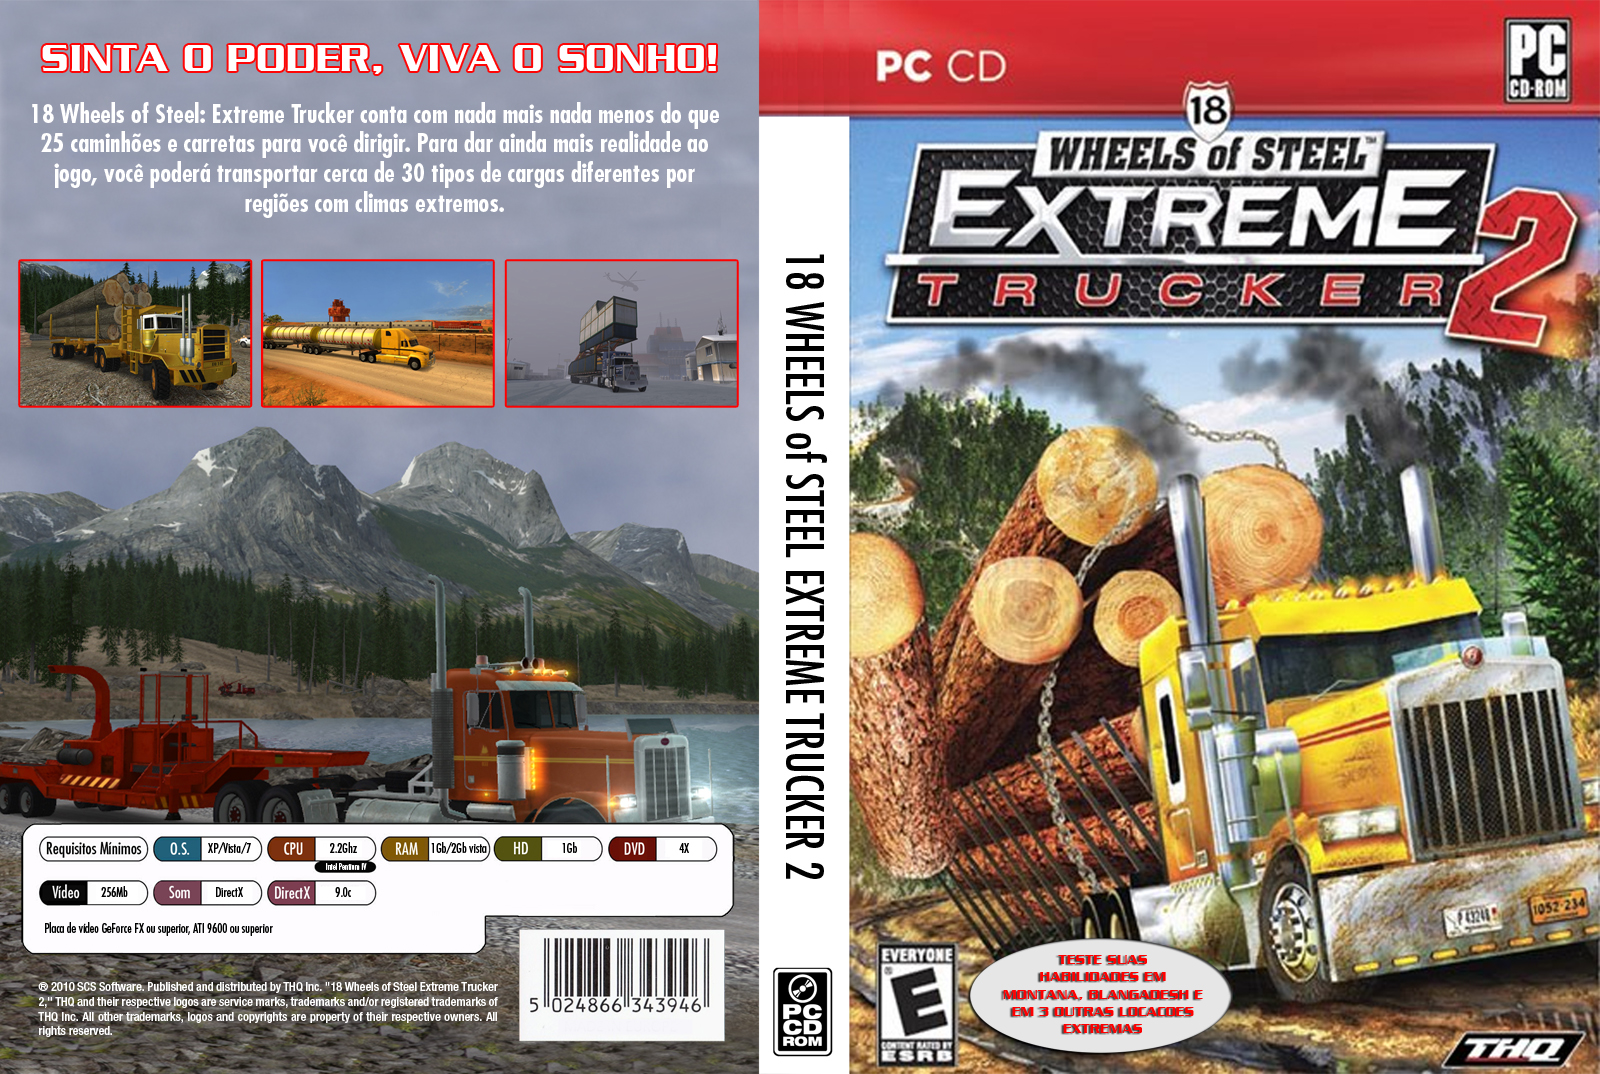 18 wheels of steel extreme trucker activation code free